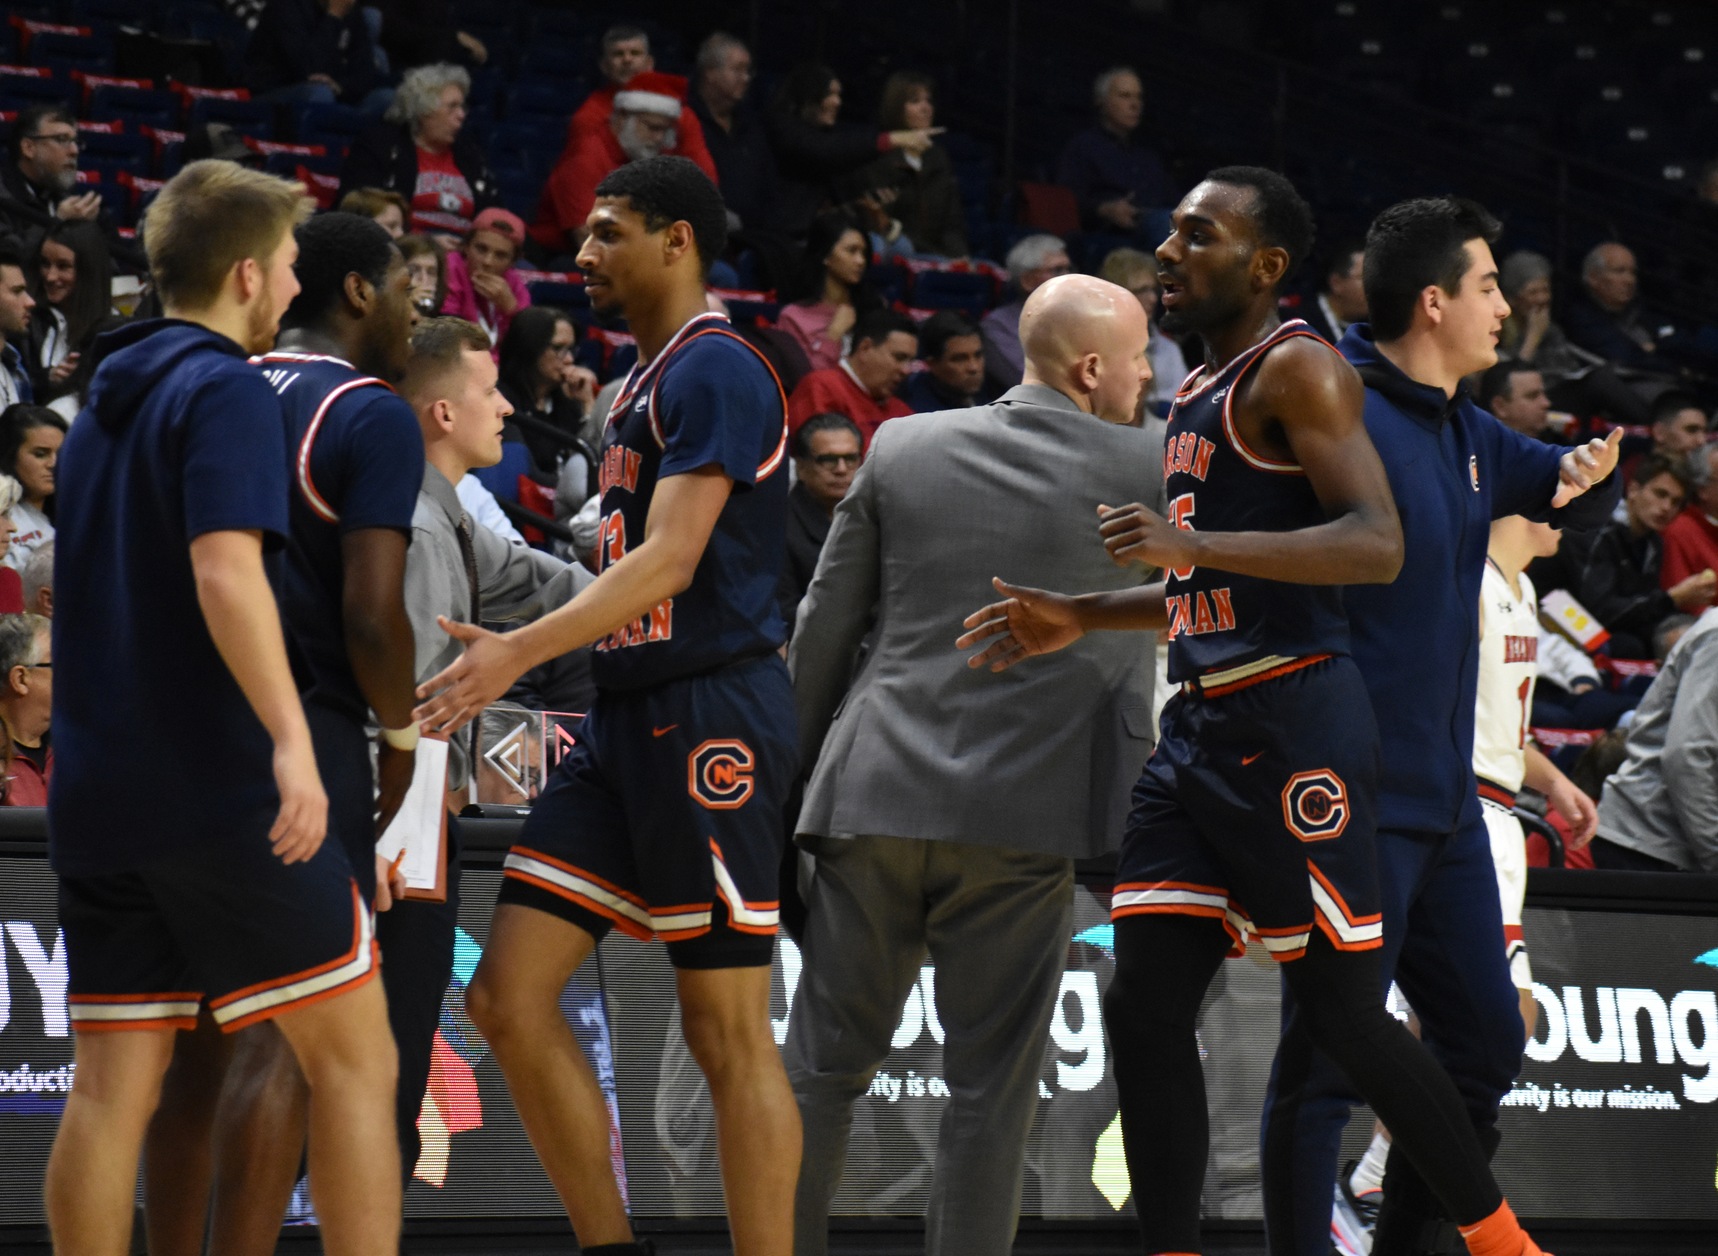 Carson-Newman falls in exhibition contest at Belmont